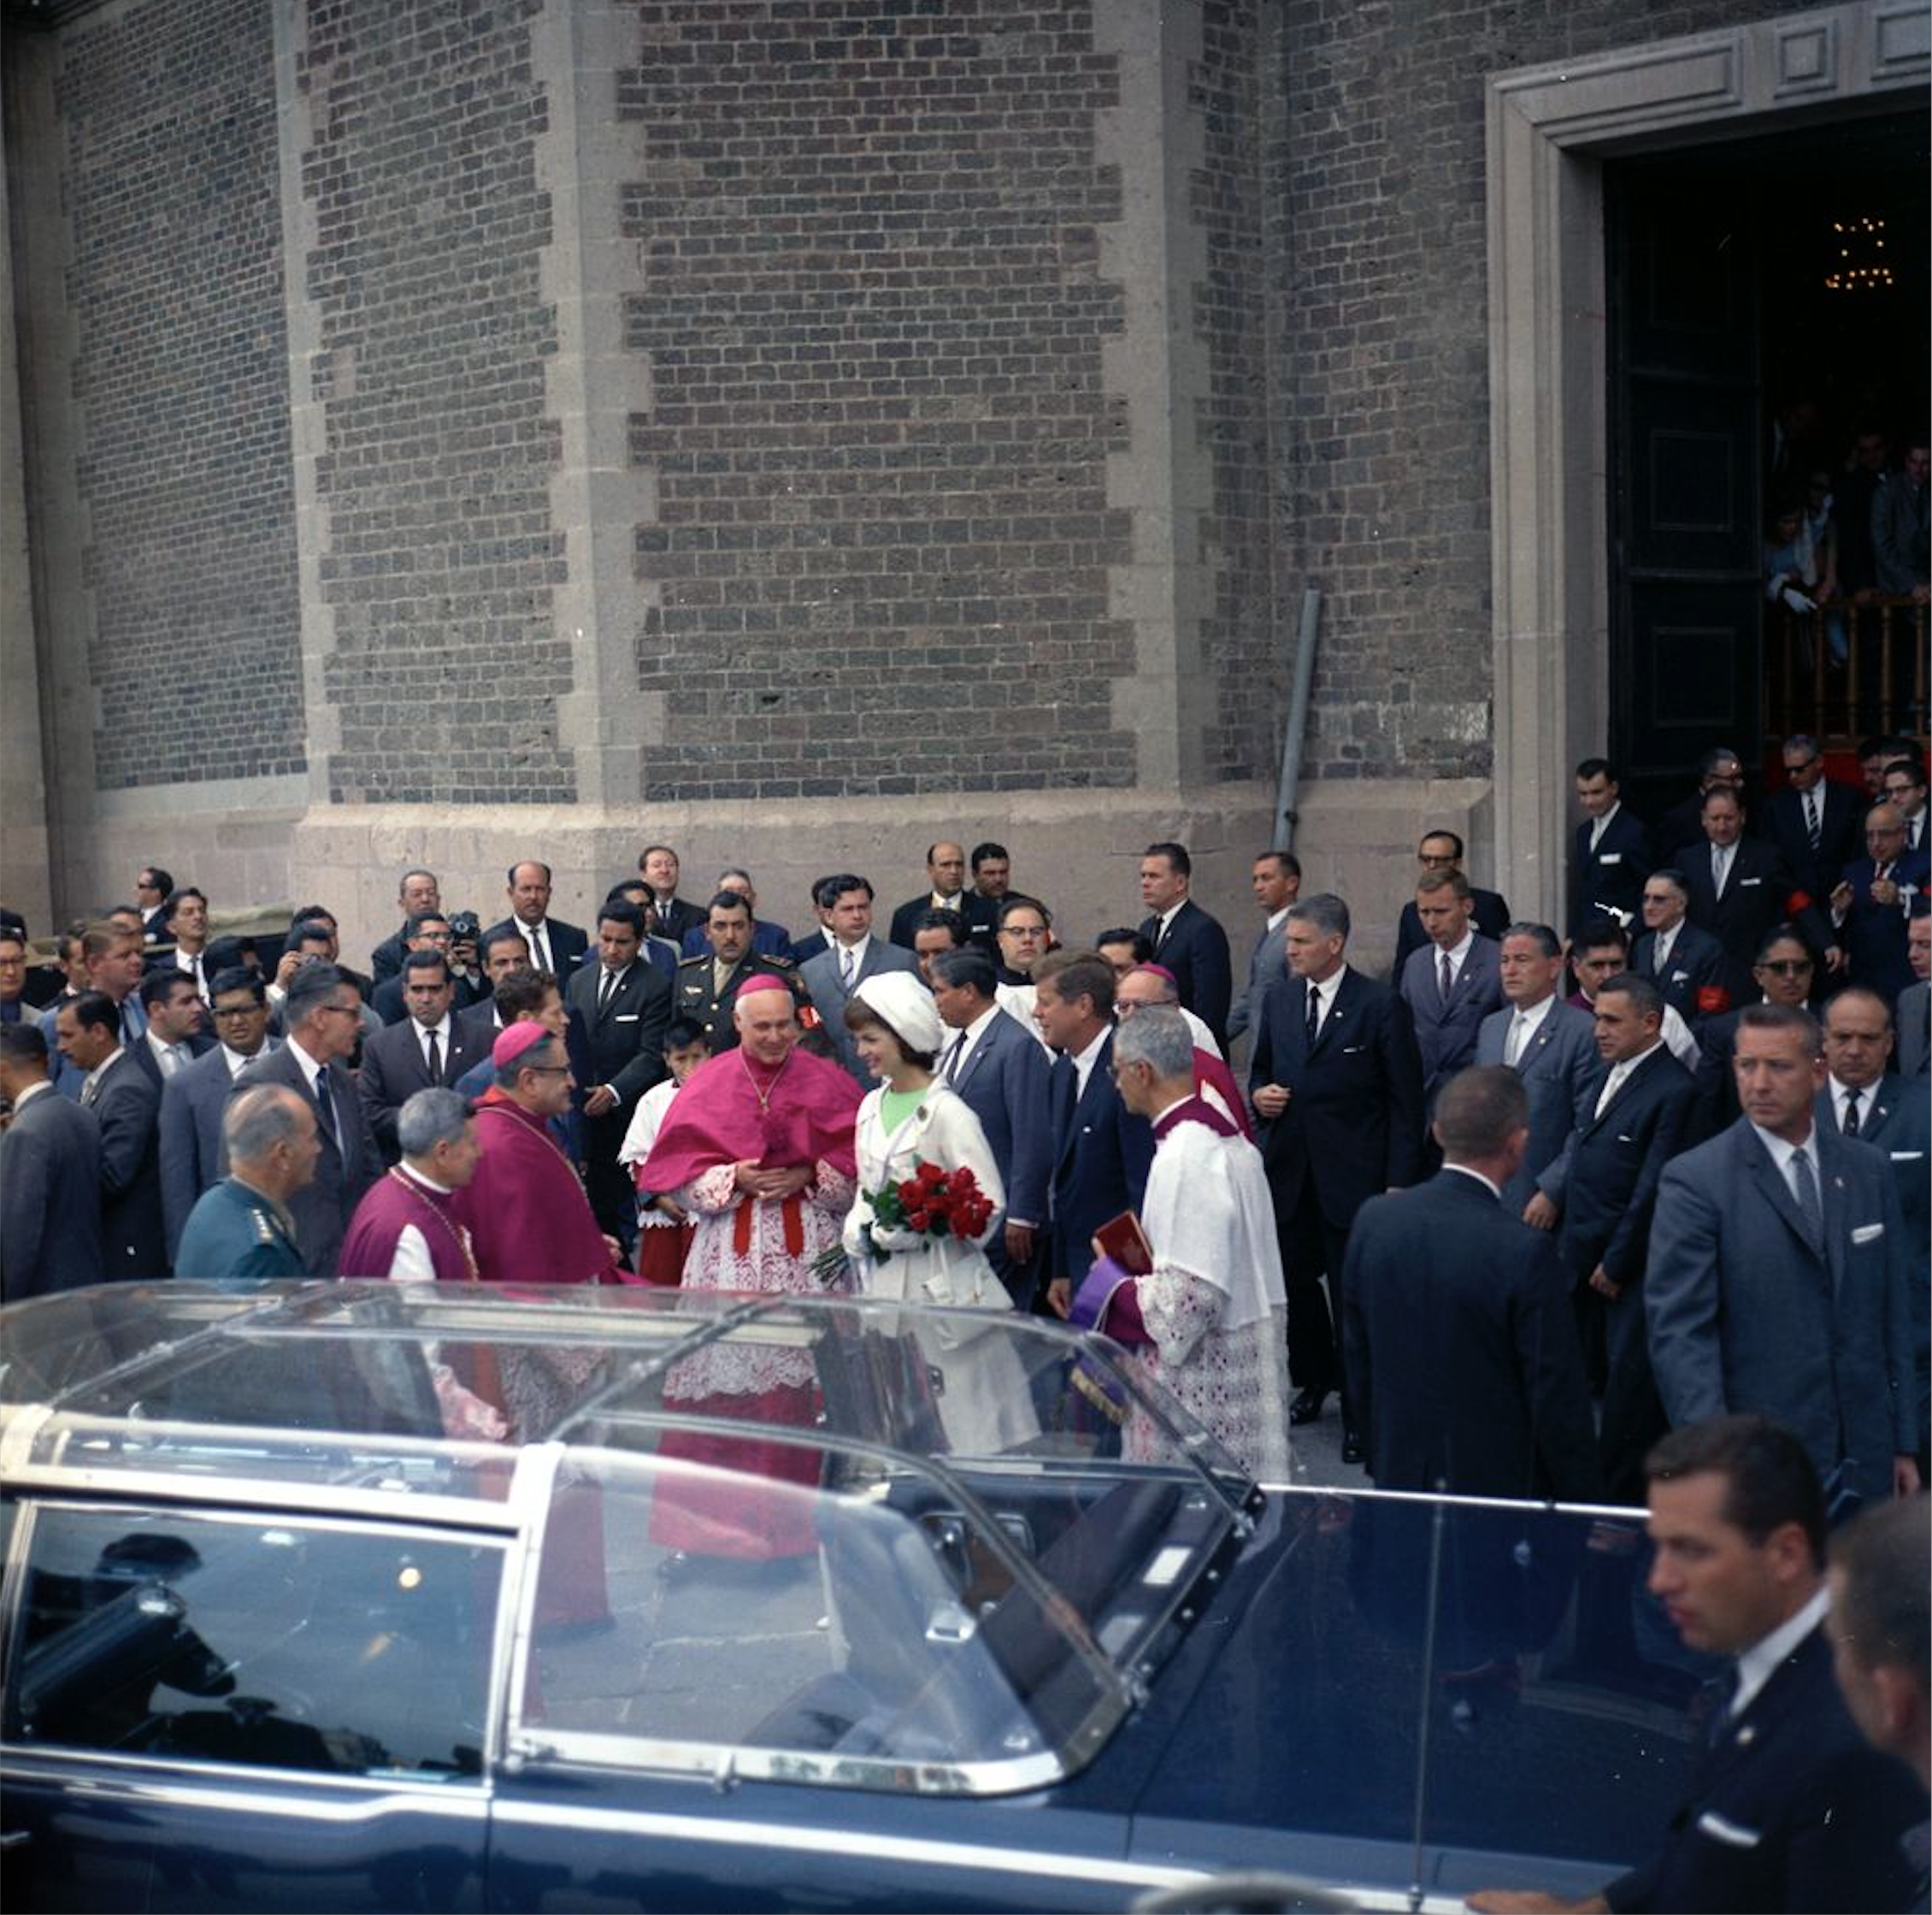 President John F. Kennedy and First Lady Jacqueline Kennedy walk toward the Presidential limousine (Lincoln-Mercury Continental with bubble-top) following mass at the Basílica de Nuestra Señora de Guadalupe (Basilica of Our Lady of Guadalupe) in Mexico City, Mexico. 